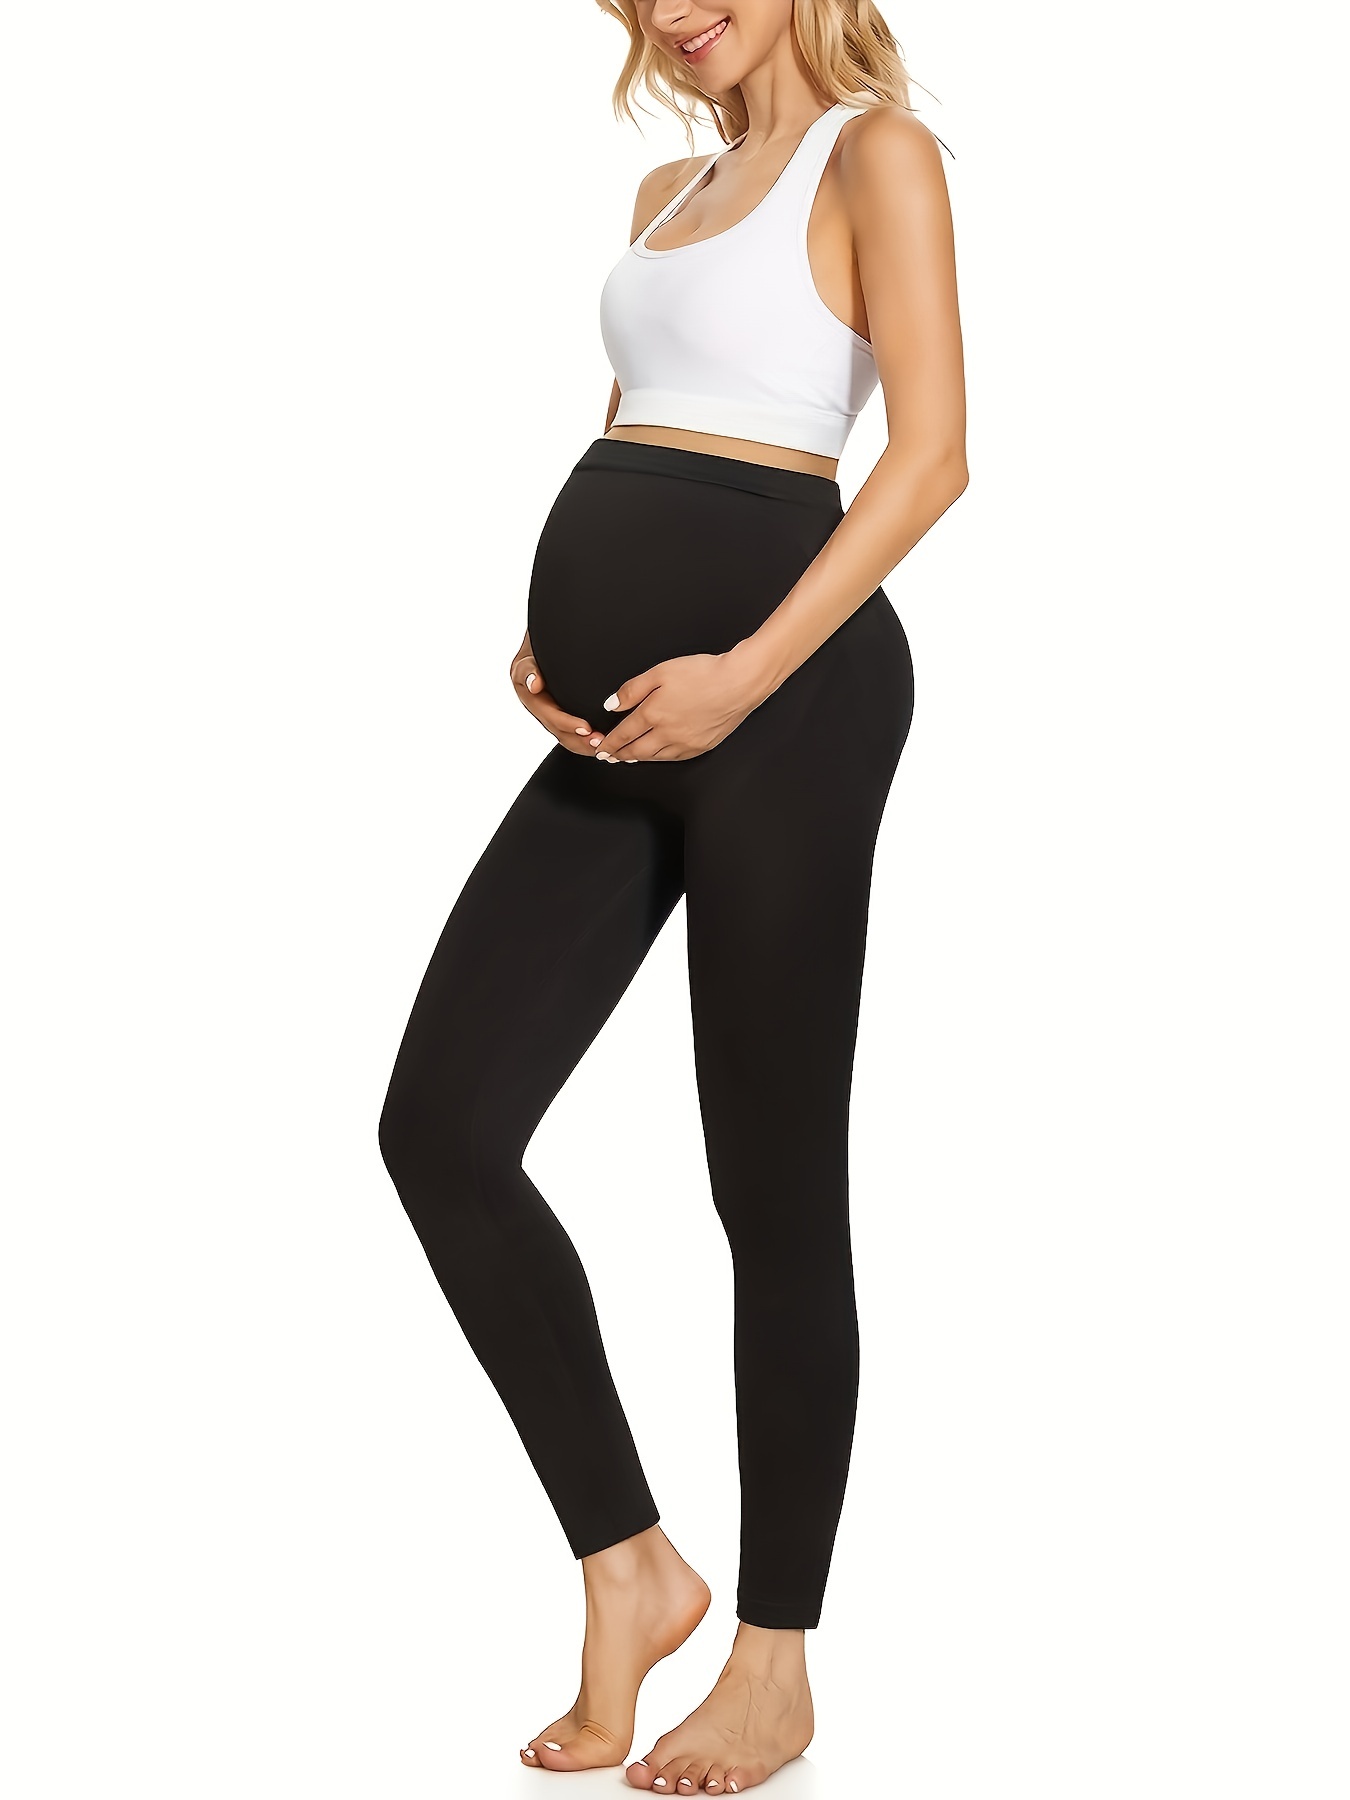 VALANDY Maternity Leggings Over Bump Buttery Soft Belly Support Stretchy  Adjustable High Waisted Pregnancy Pants Yoga Pajama